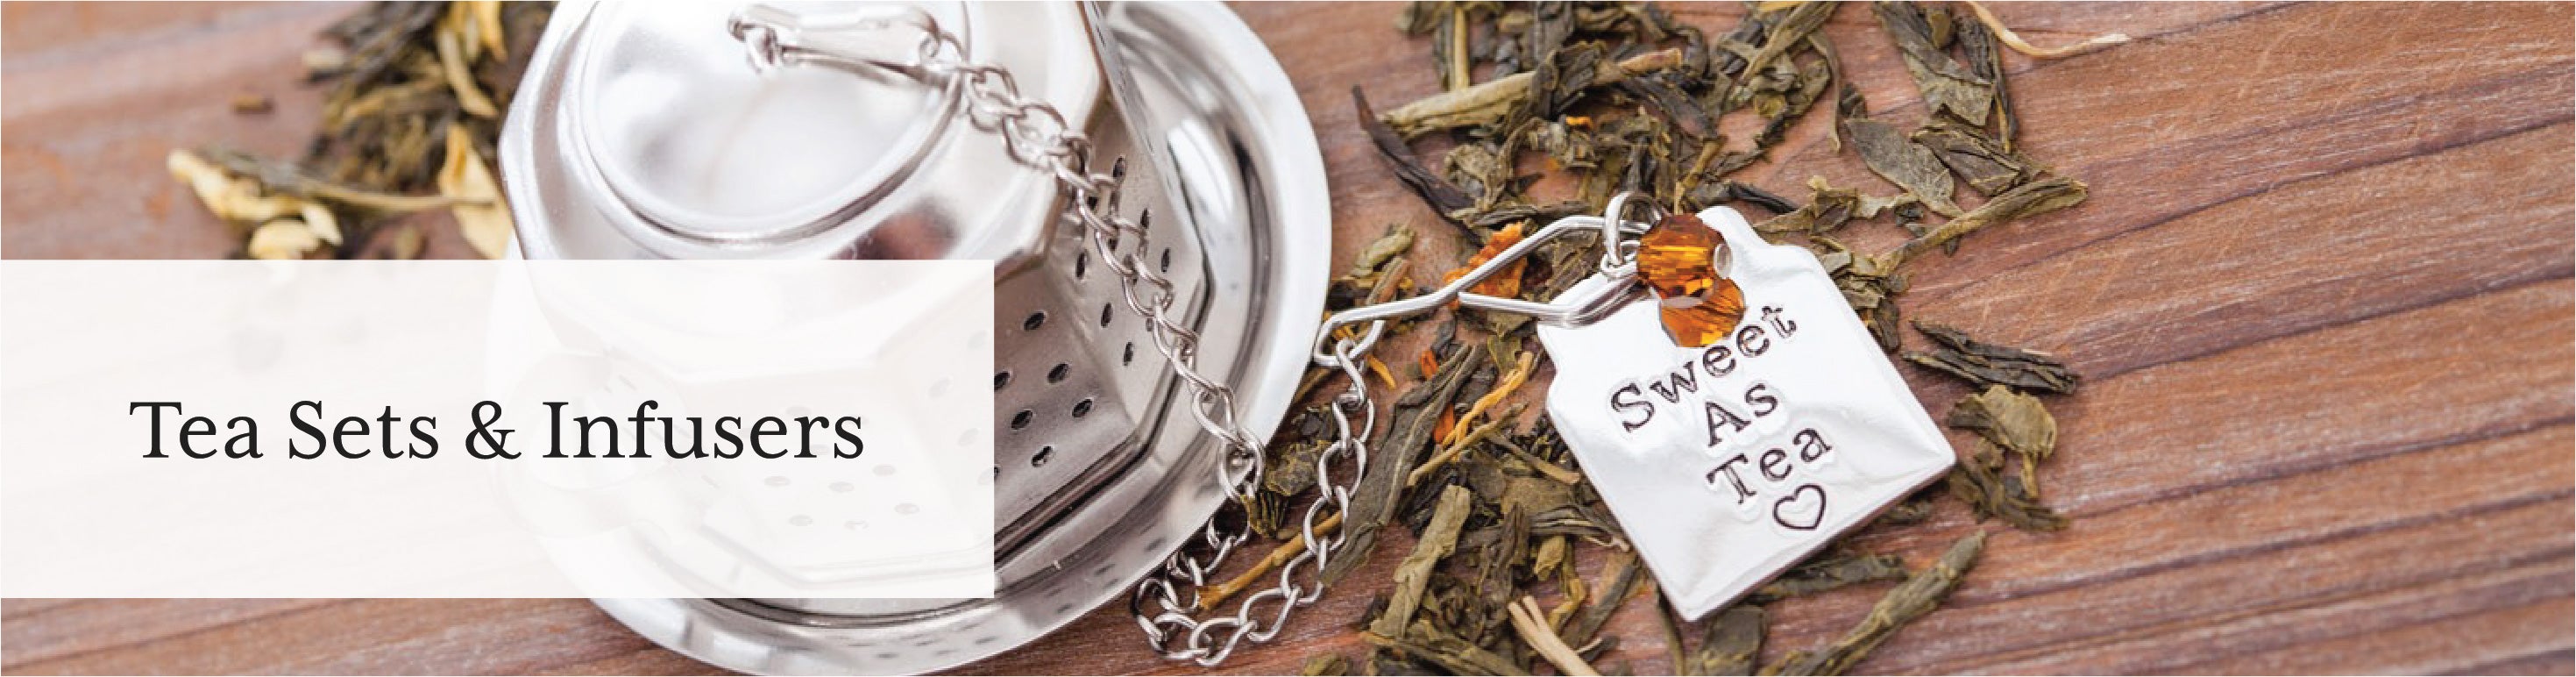 Tea Sets and Infusers